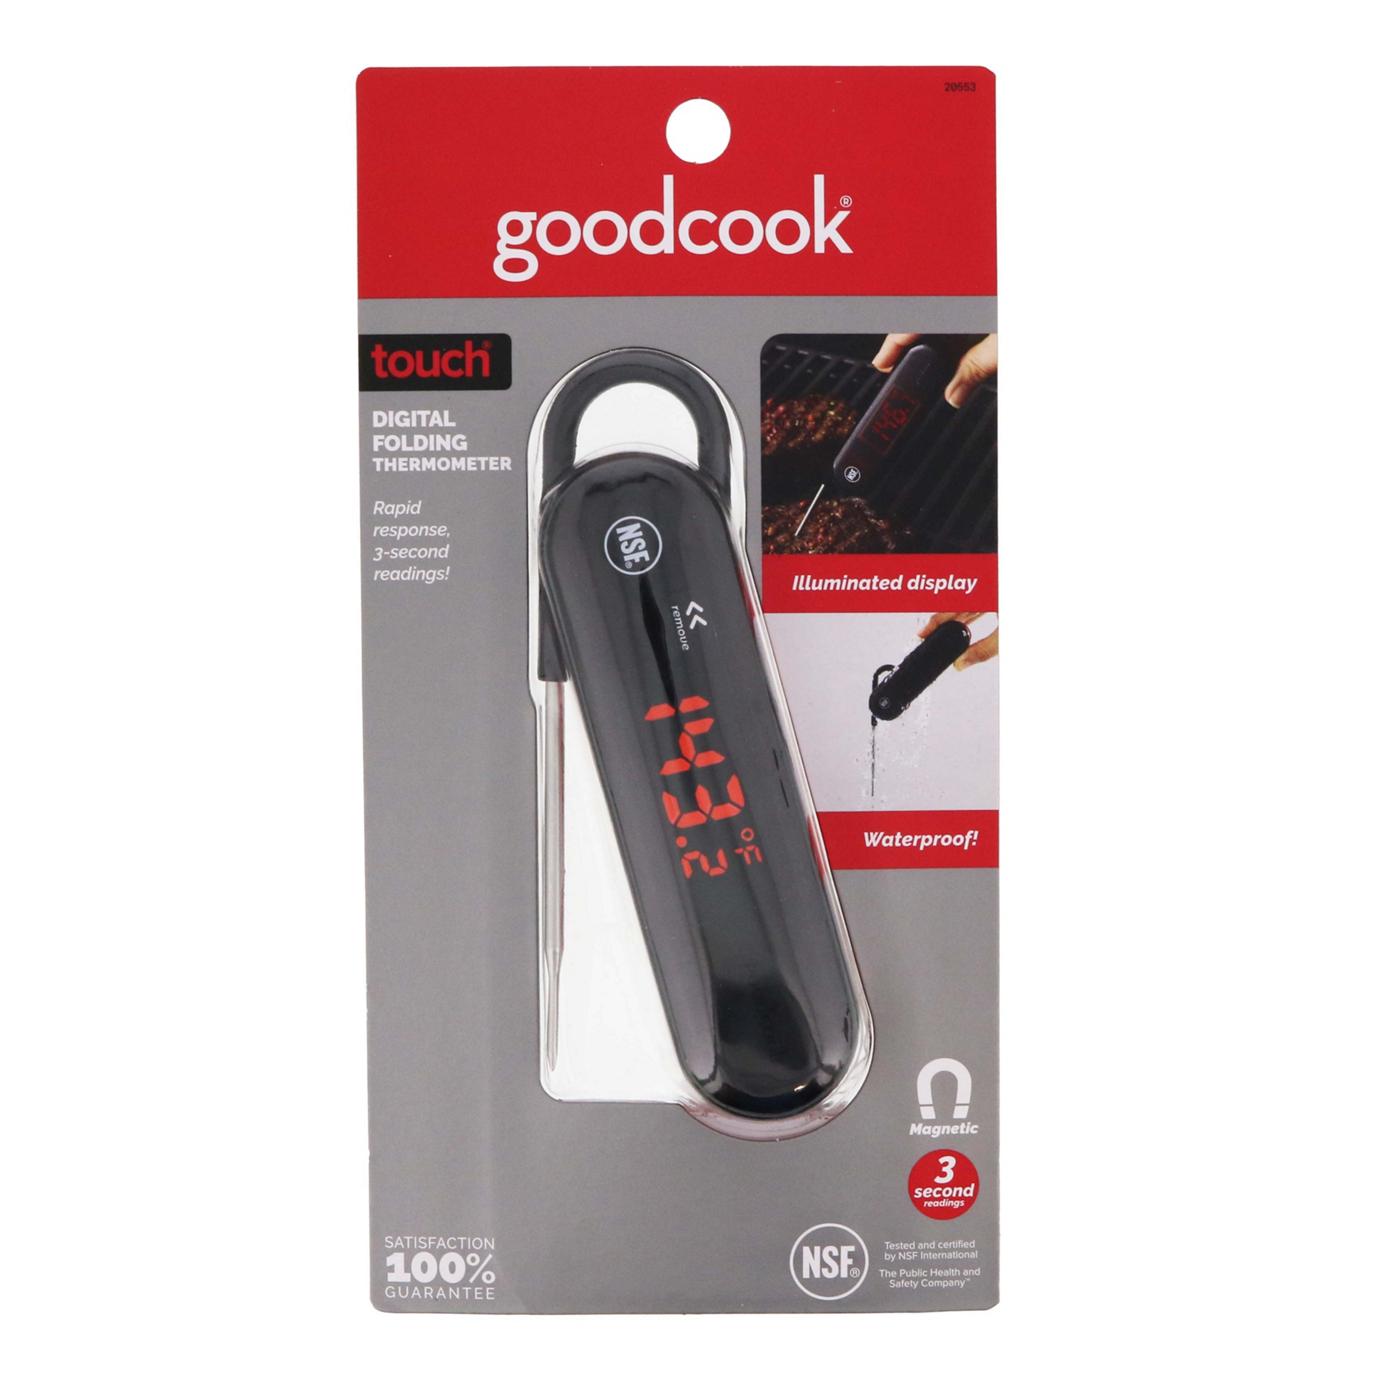 GoodCook Touch Digital Folding Thermometer; image 1 of 5